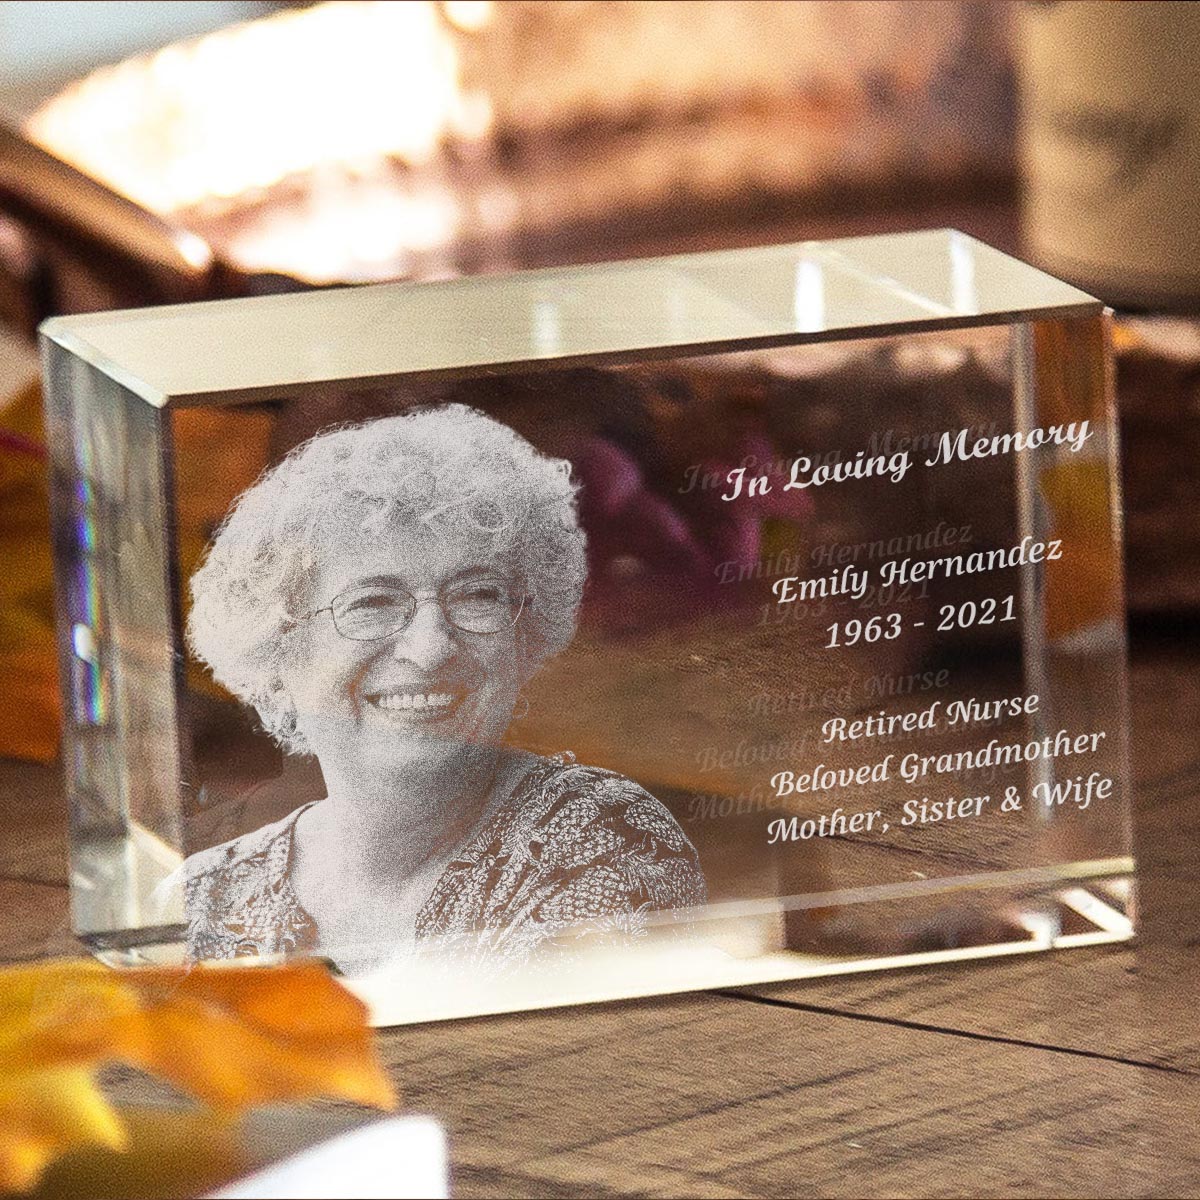 In Loving Memory - Memorial gift for loss of - Personalized Laser Engraving 3D Cuboid Shaped Crystal Lamp